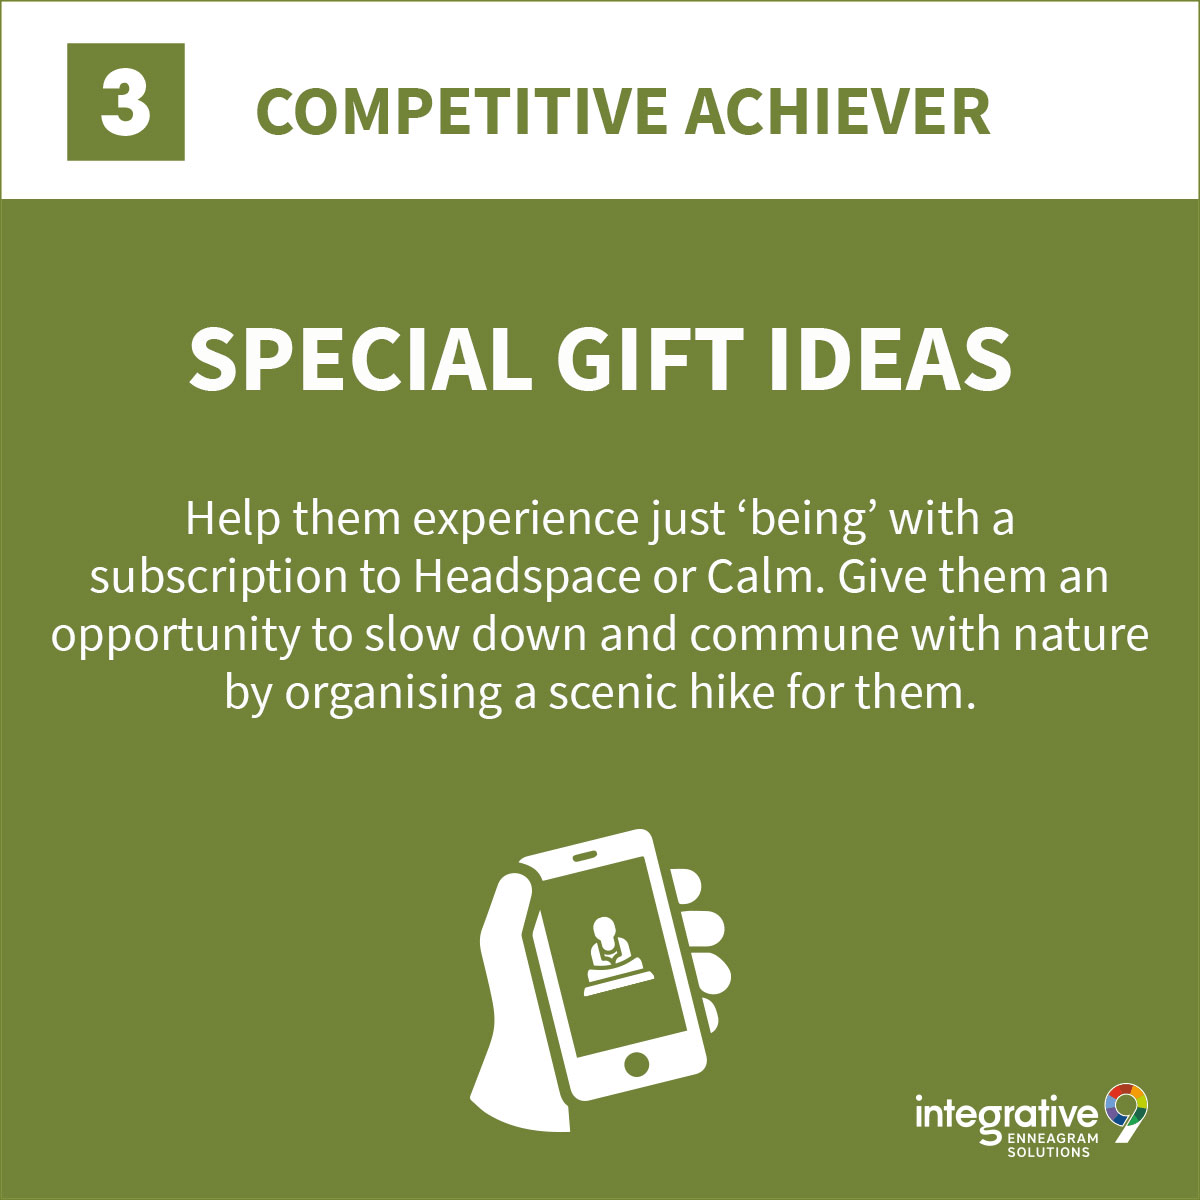 conpetitive achiever special gift